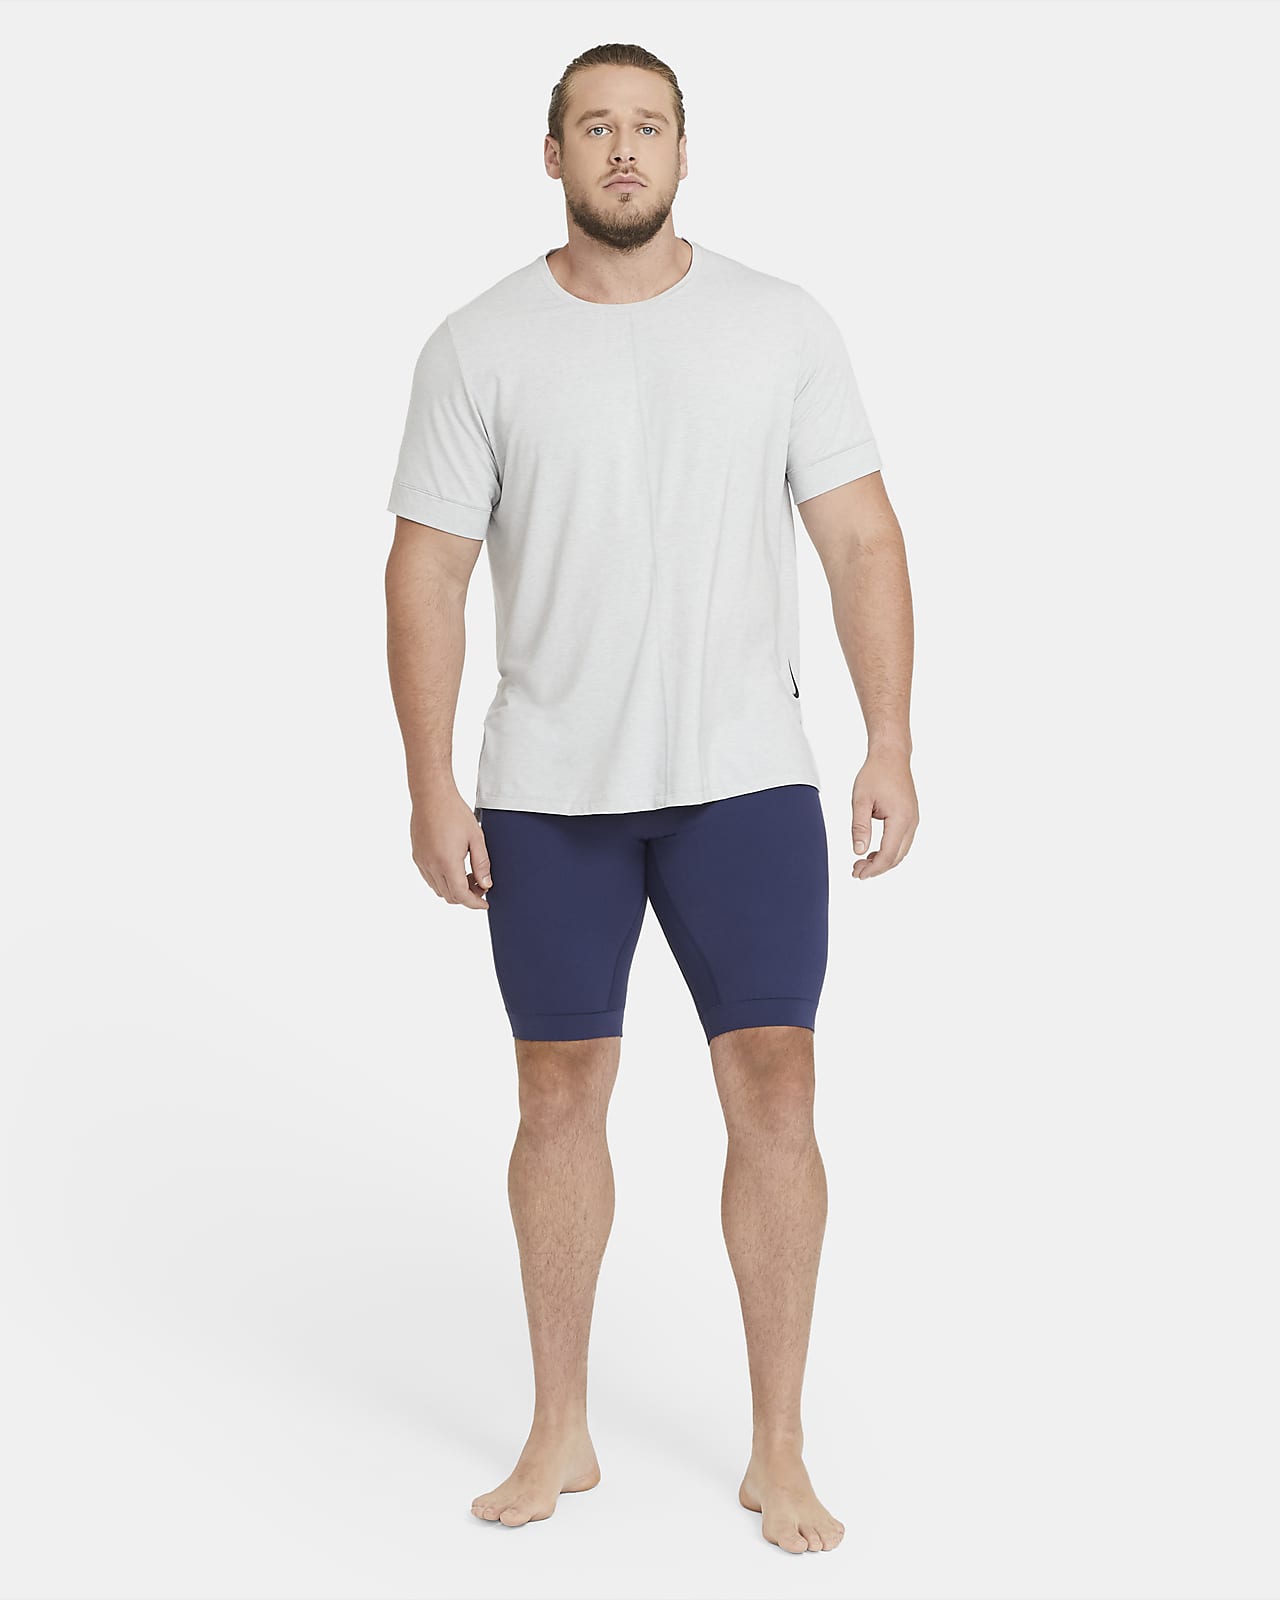 nike shirts and shorts for men